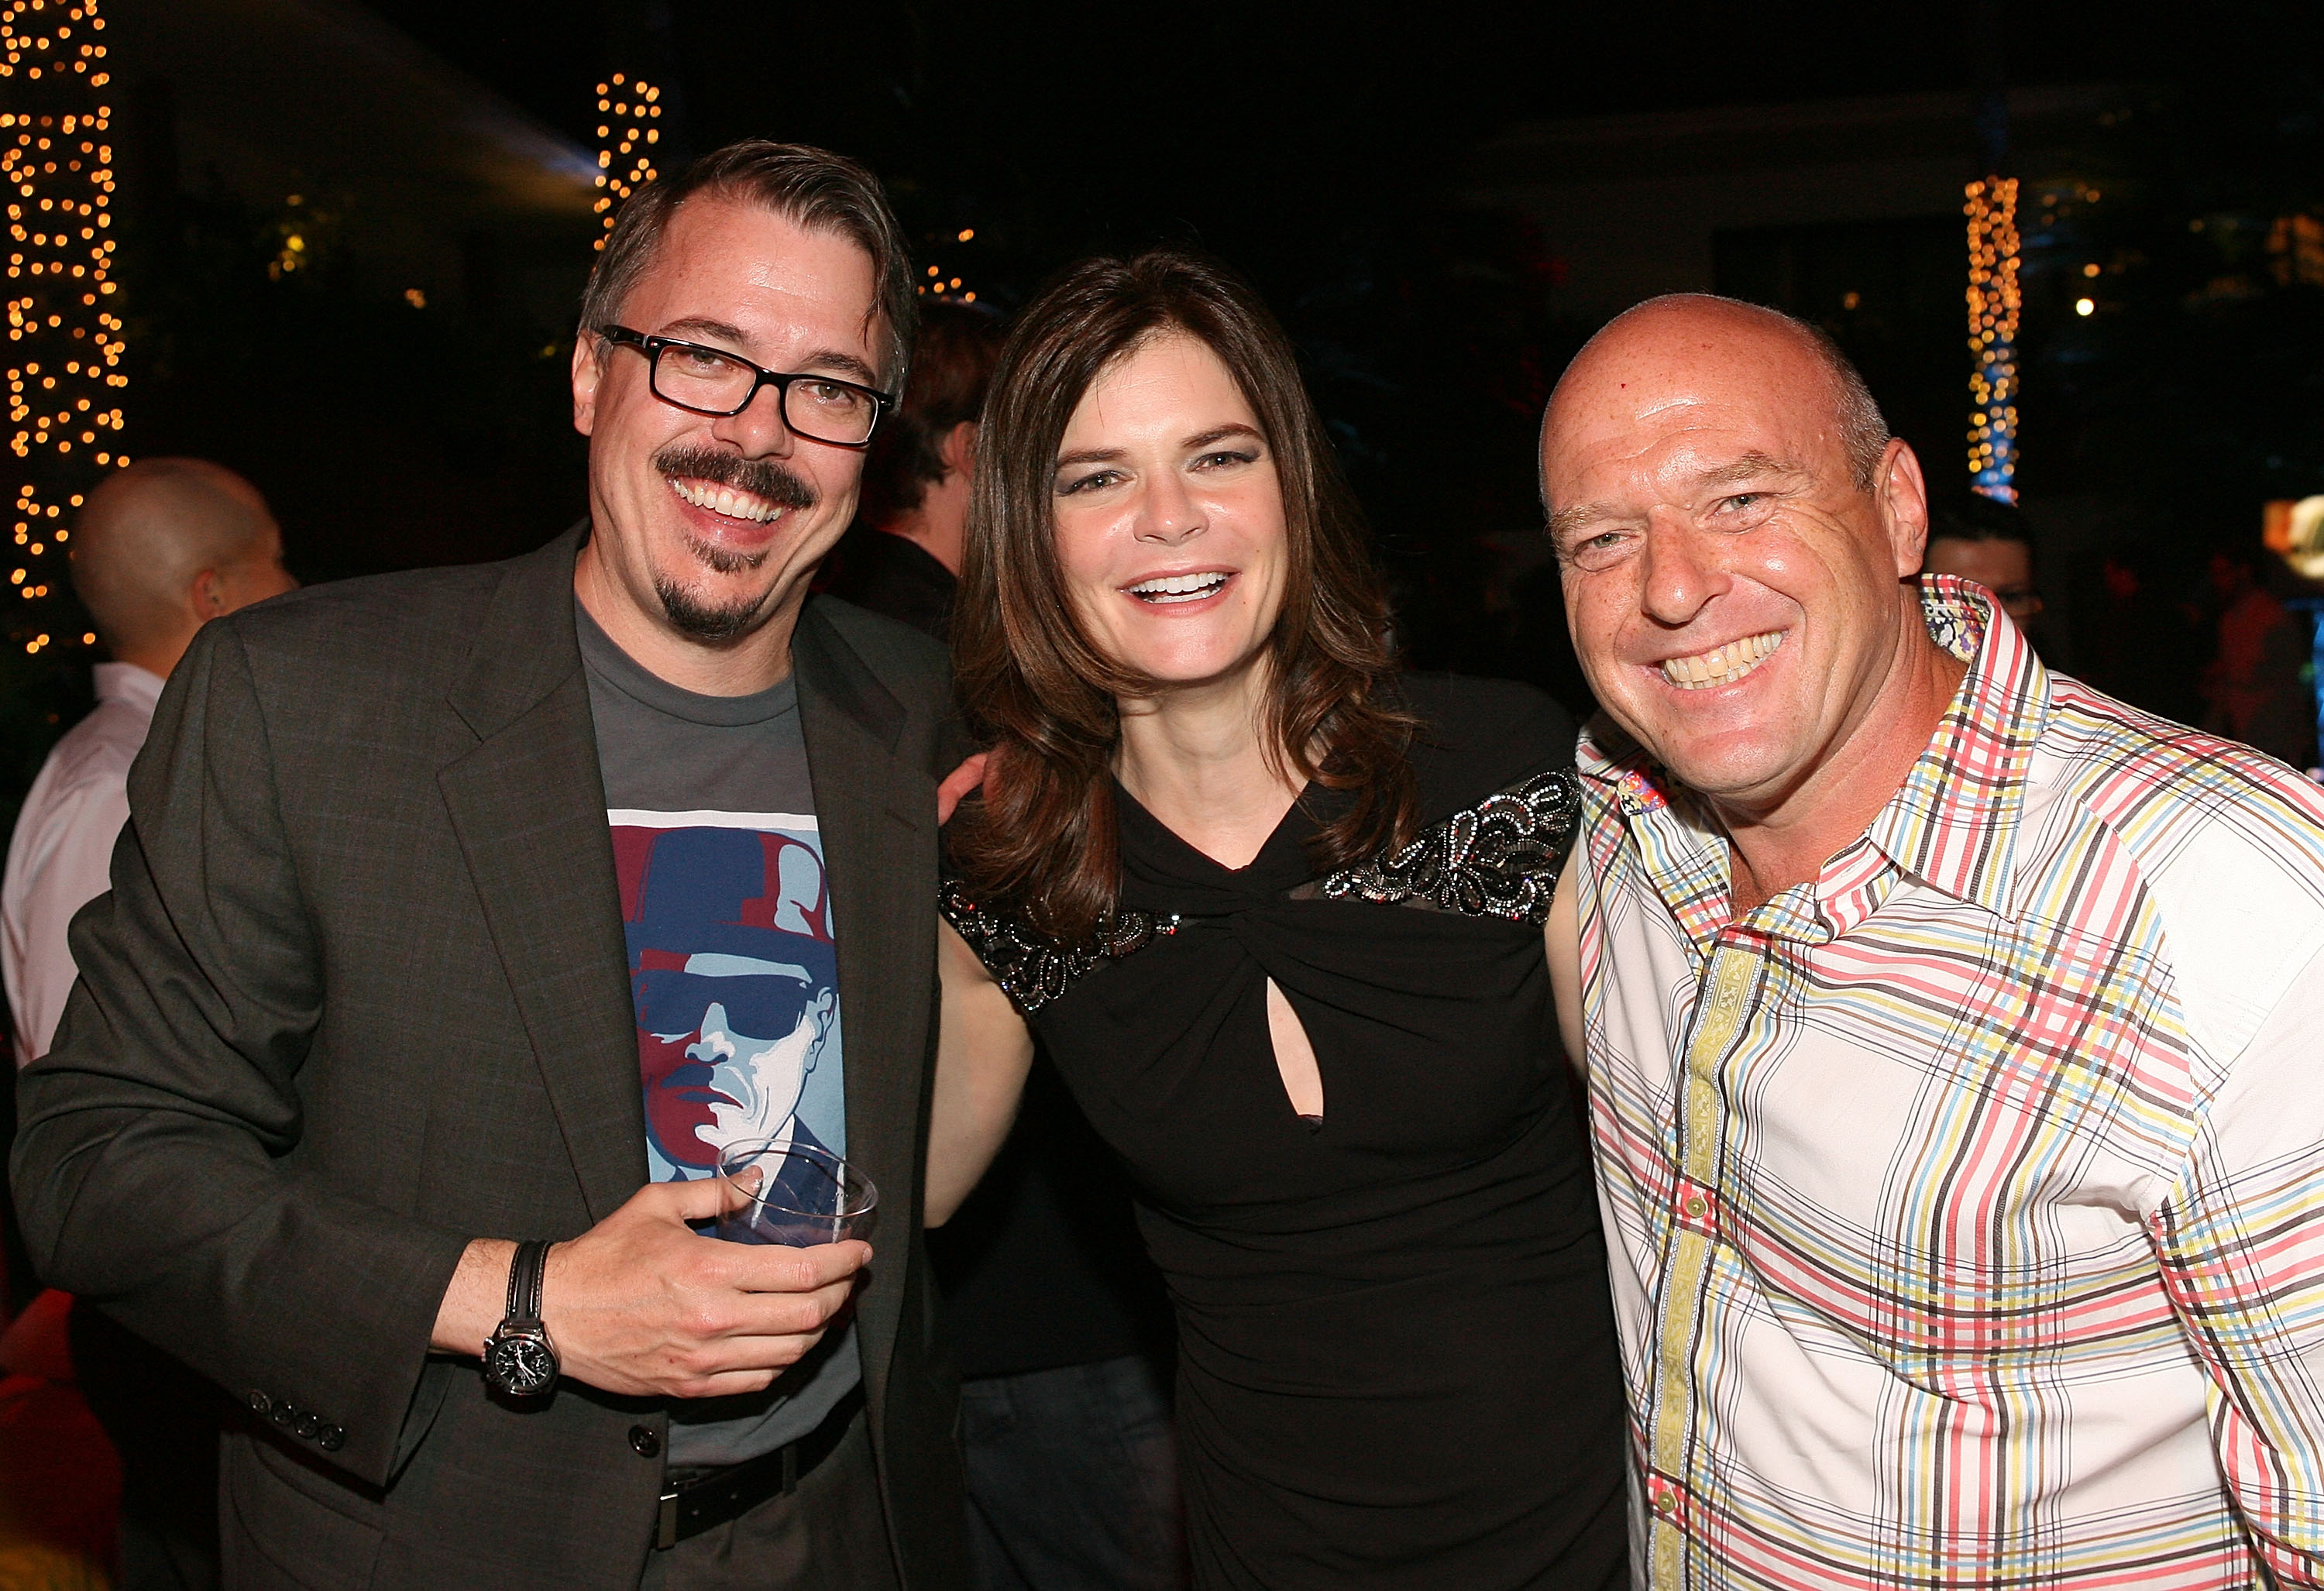 Vince Gilligan with arm around Dean Norris and Betsy Brandt